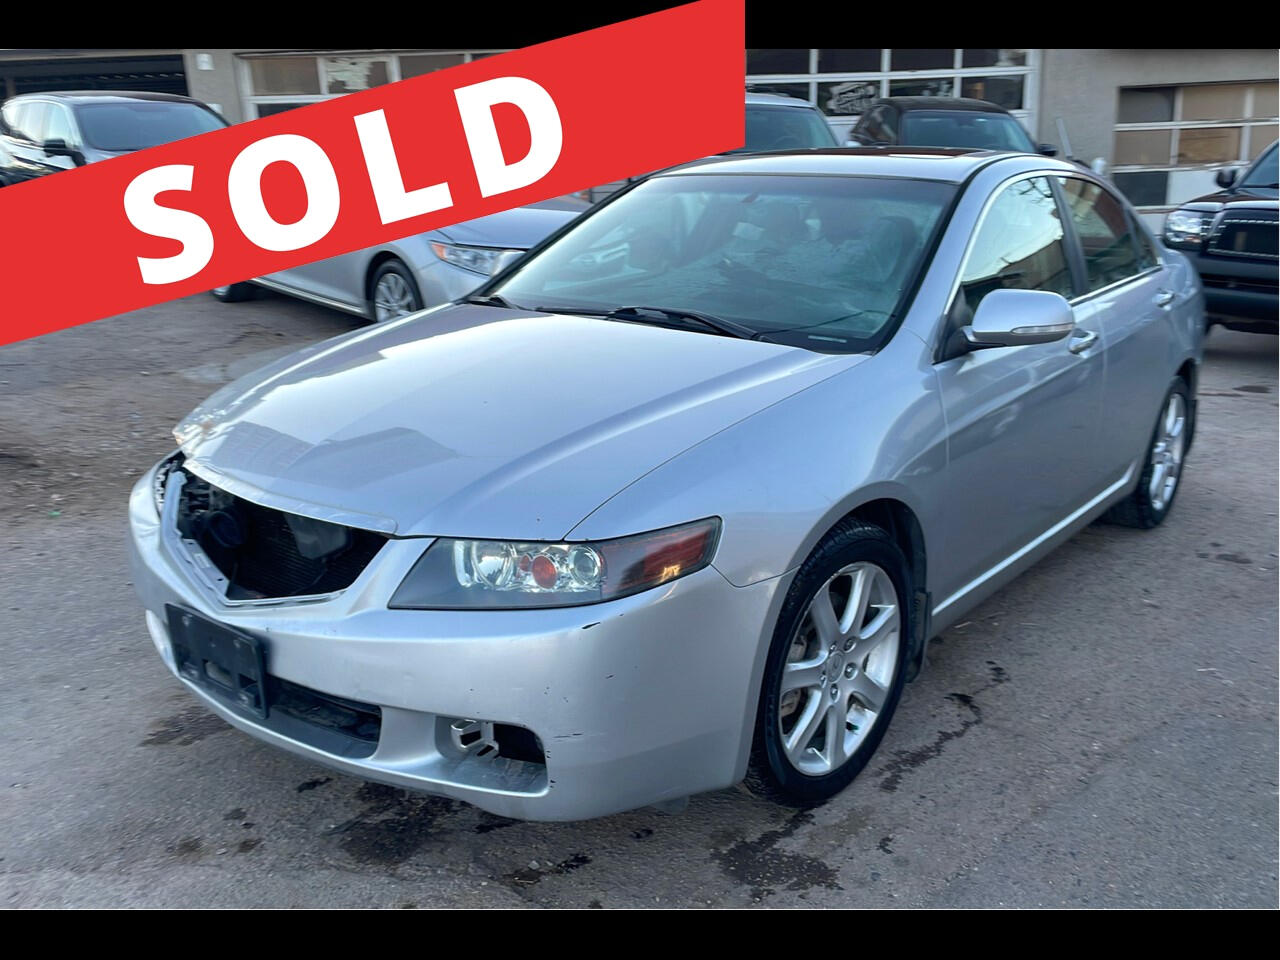 2005 Acura TSX 4dr Sdn AT